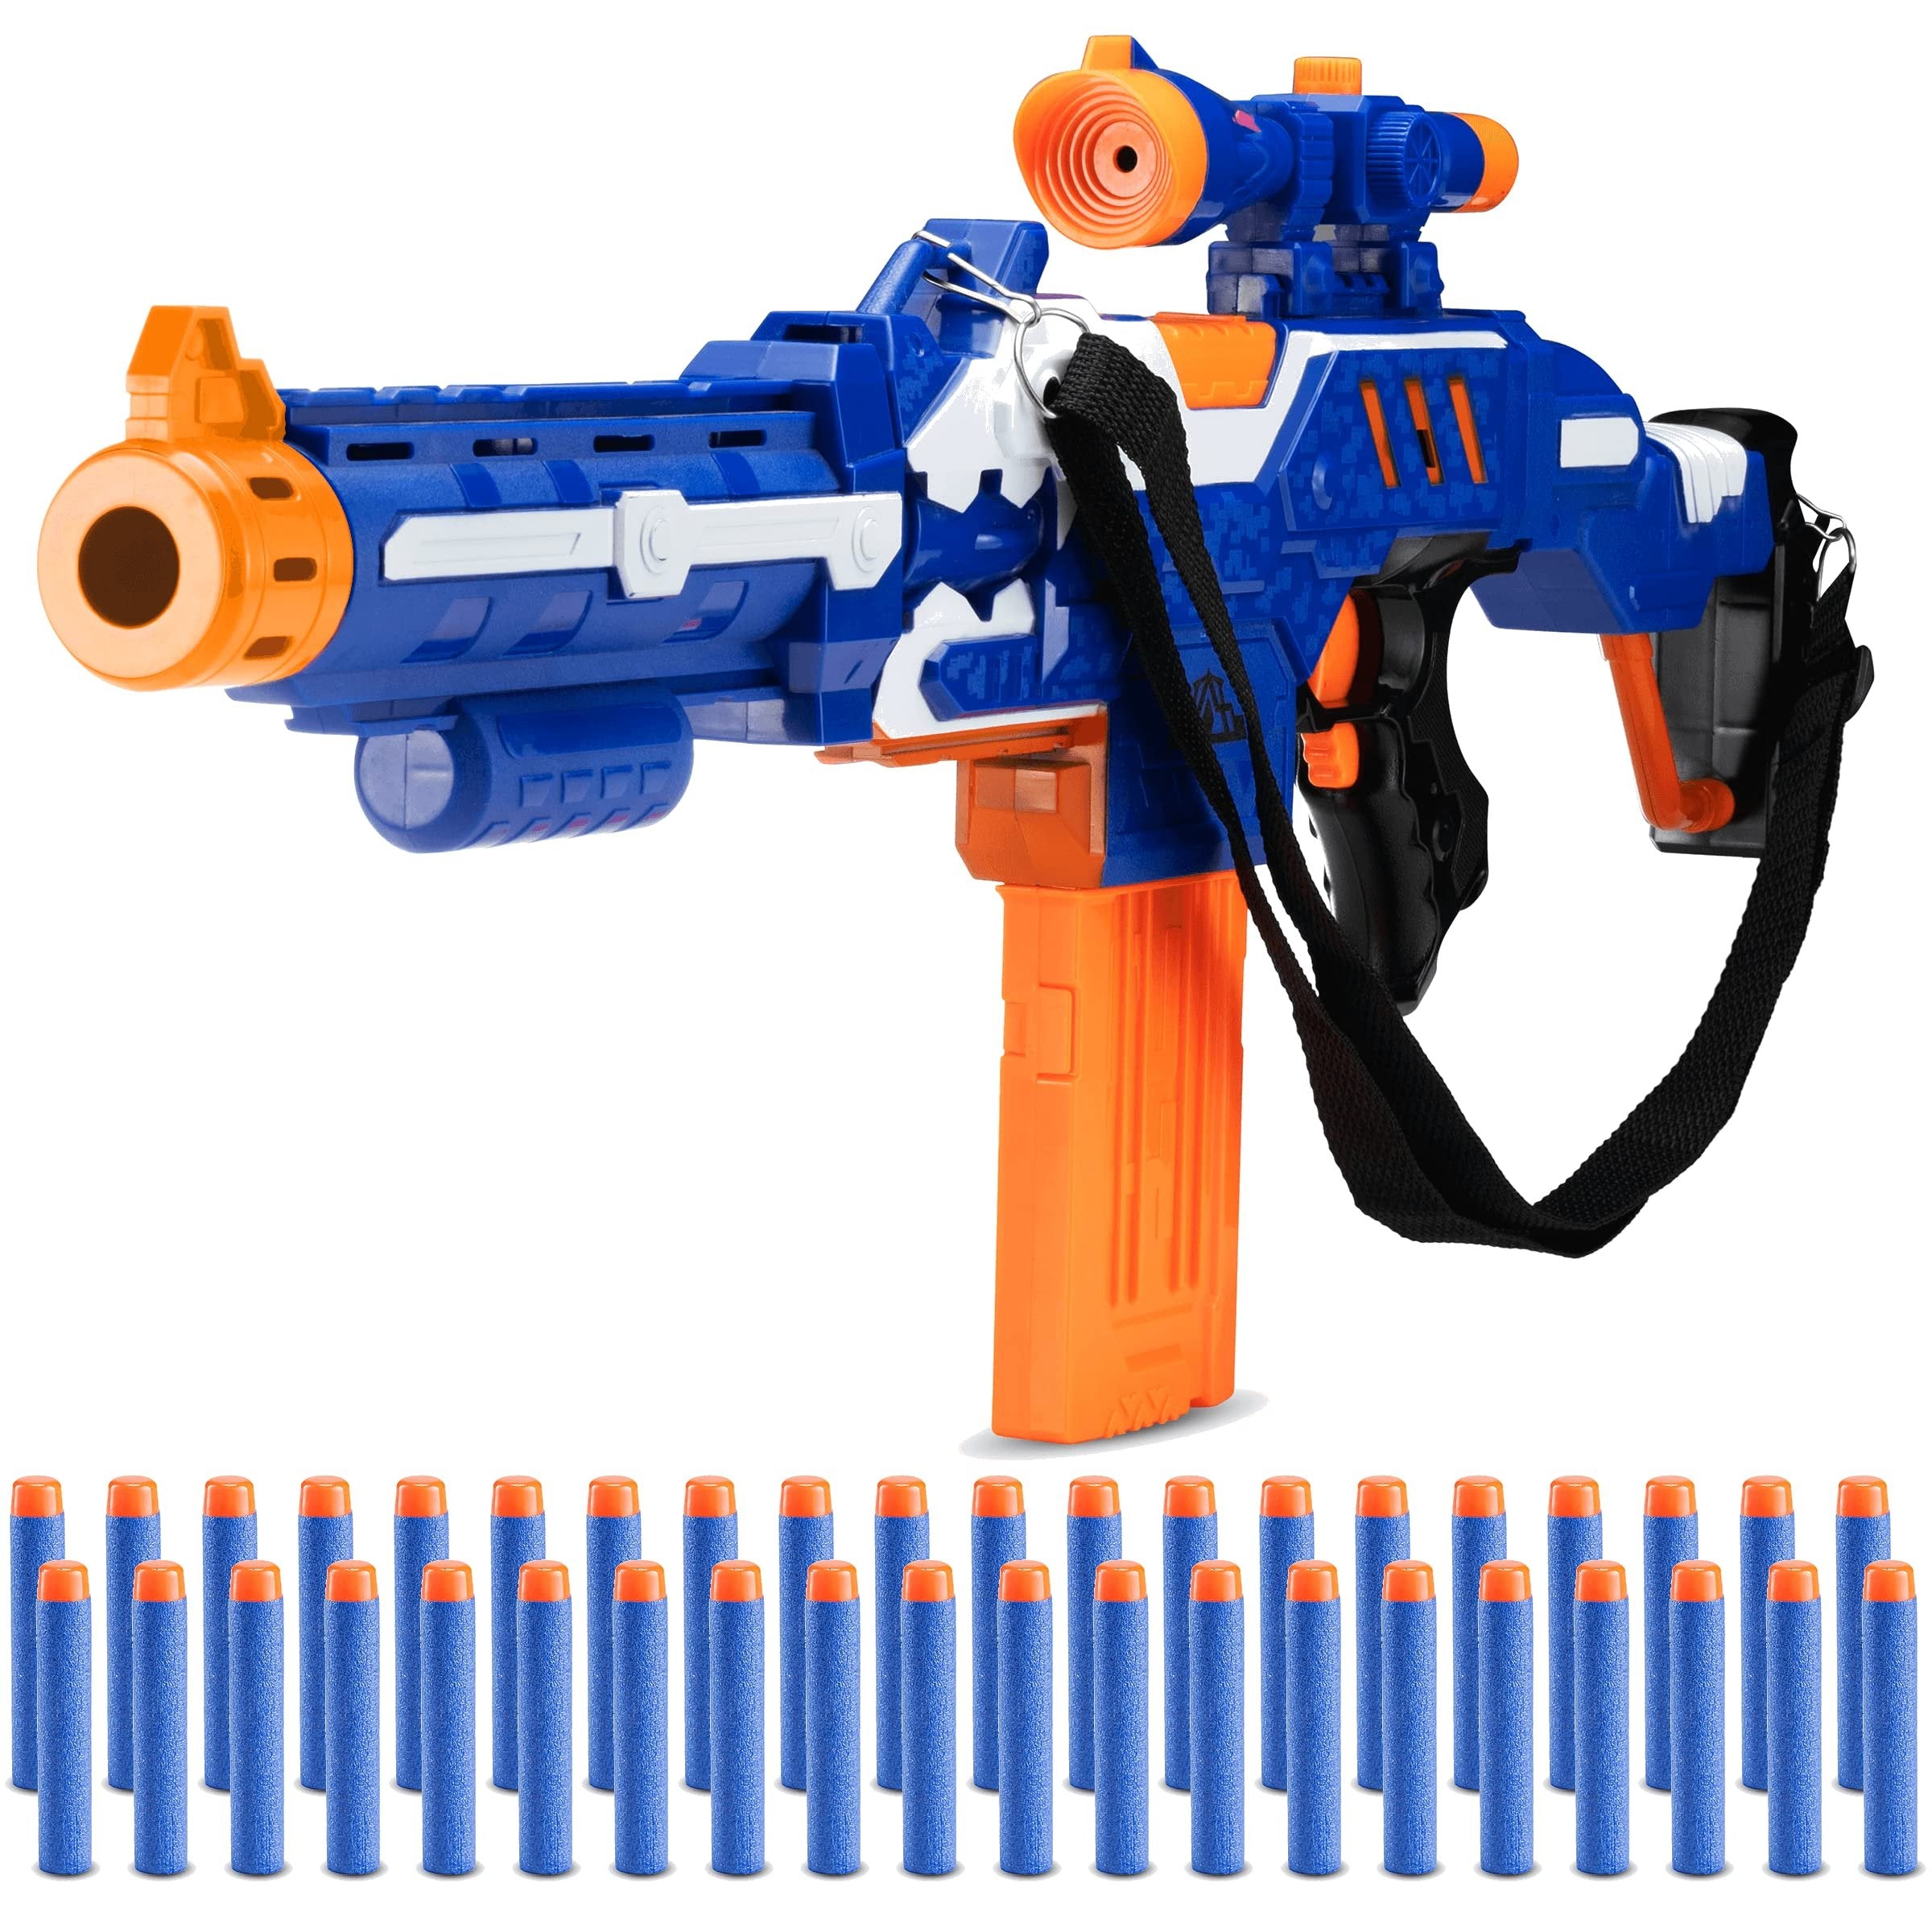 Electric Toy Foam Blasters for Kids - Automatic Soft Dart Launcher with Scope and Shoulder Strap - Battery-Powered Plastic Combat Toy for Boys and Girls - Includes 40 Soft Darts